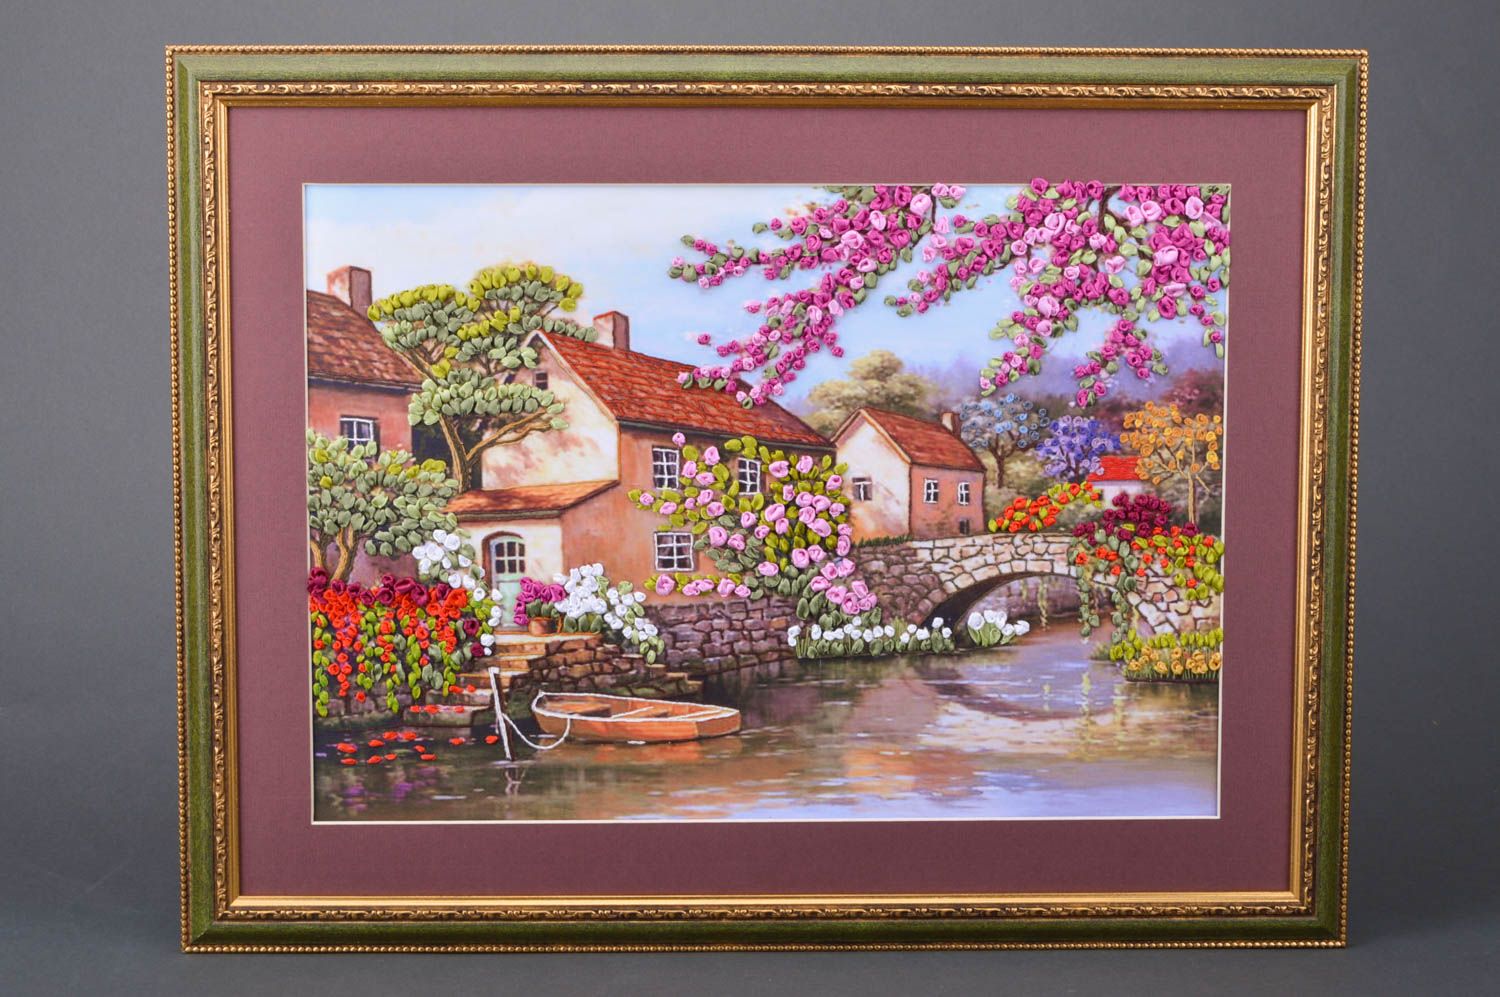 Horizontal handmade satin ribbon embroidery wall hanging in frame Landscape photo 5